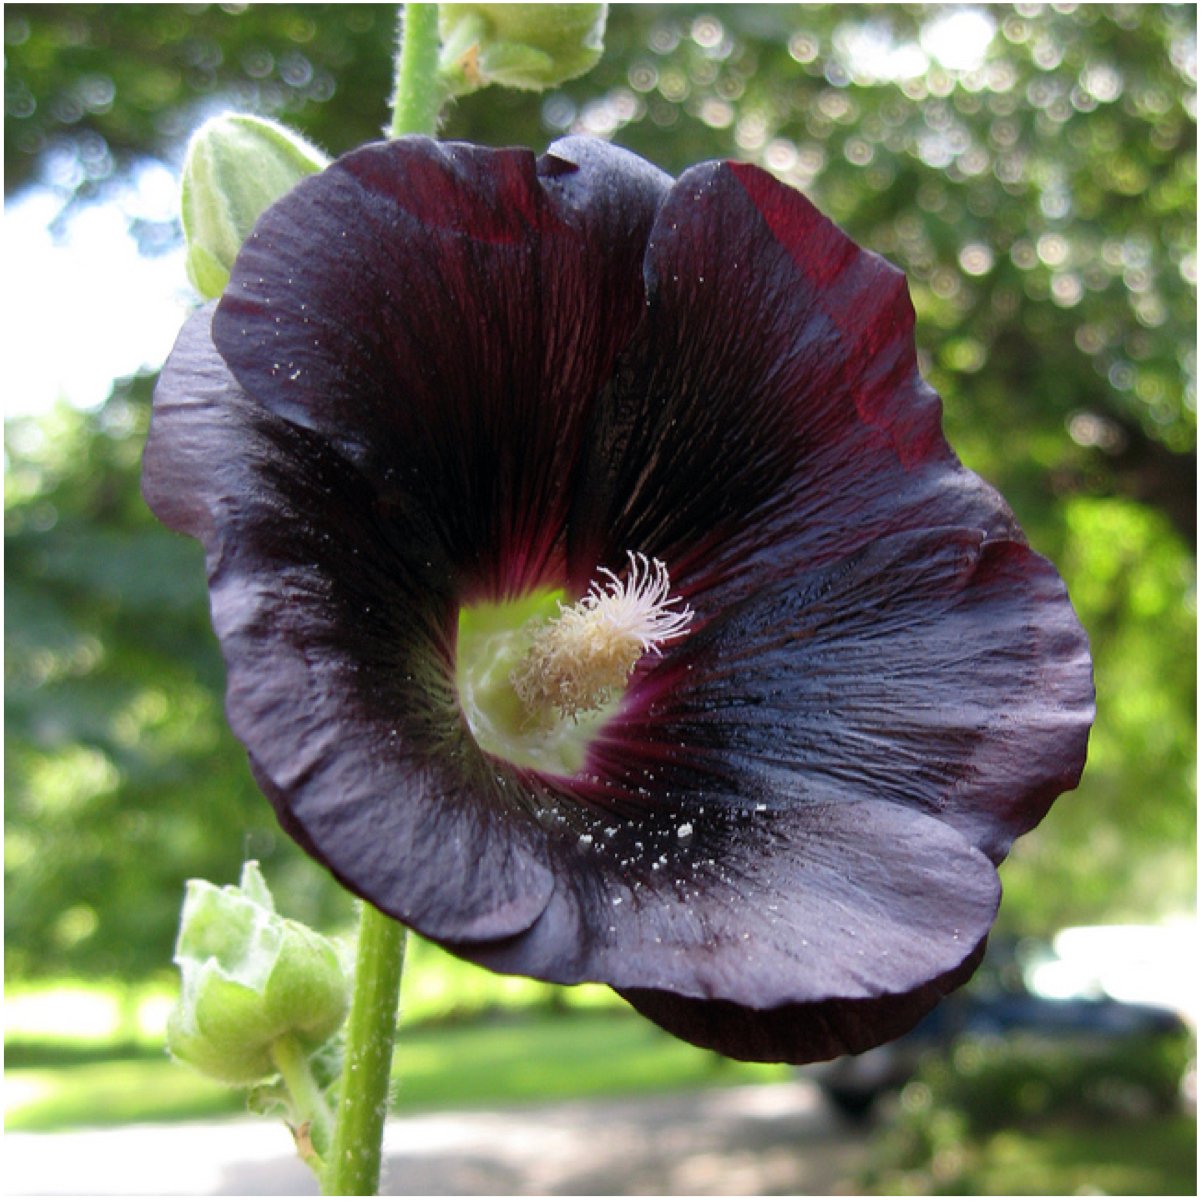 Black Hollyhock is a gorgeous, deep mahogany colored flower which blooms through the summer months. The plants stand to a towering height of roughly 60 inches tall, displaying several, almost black blooms along it's erect stems.